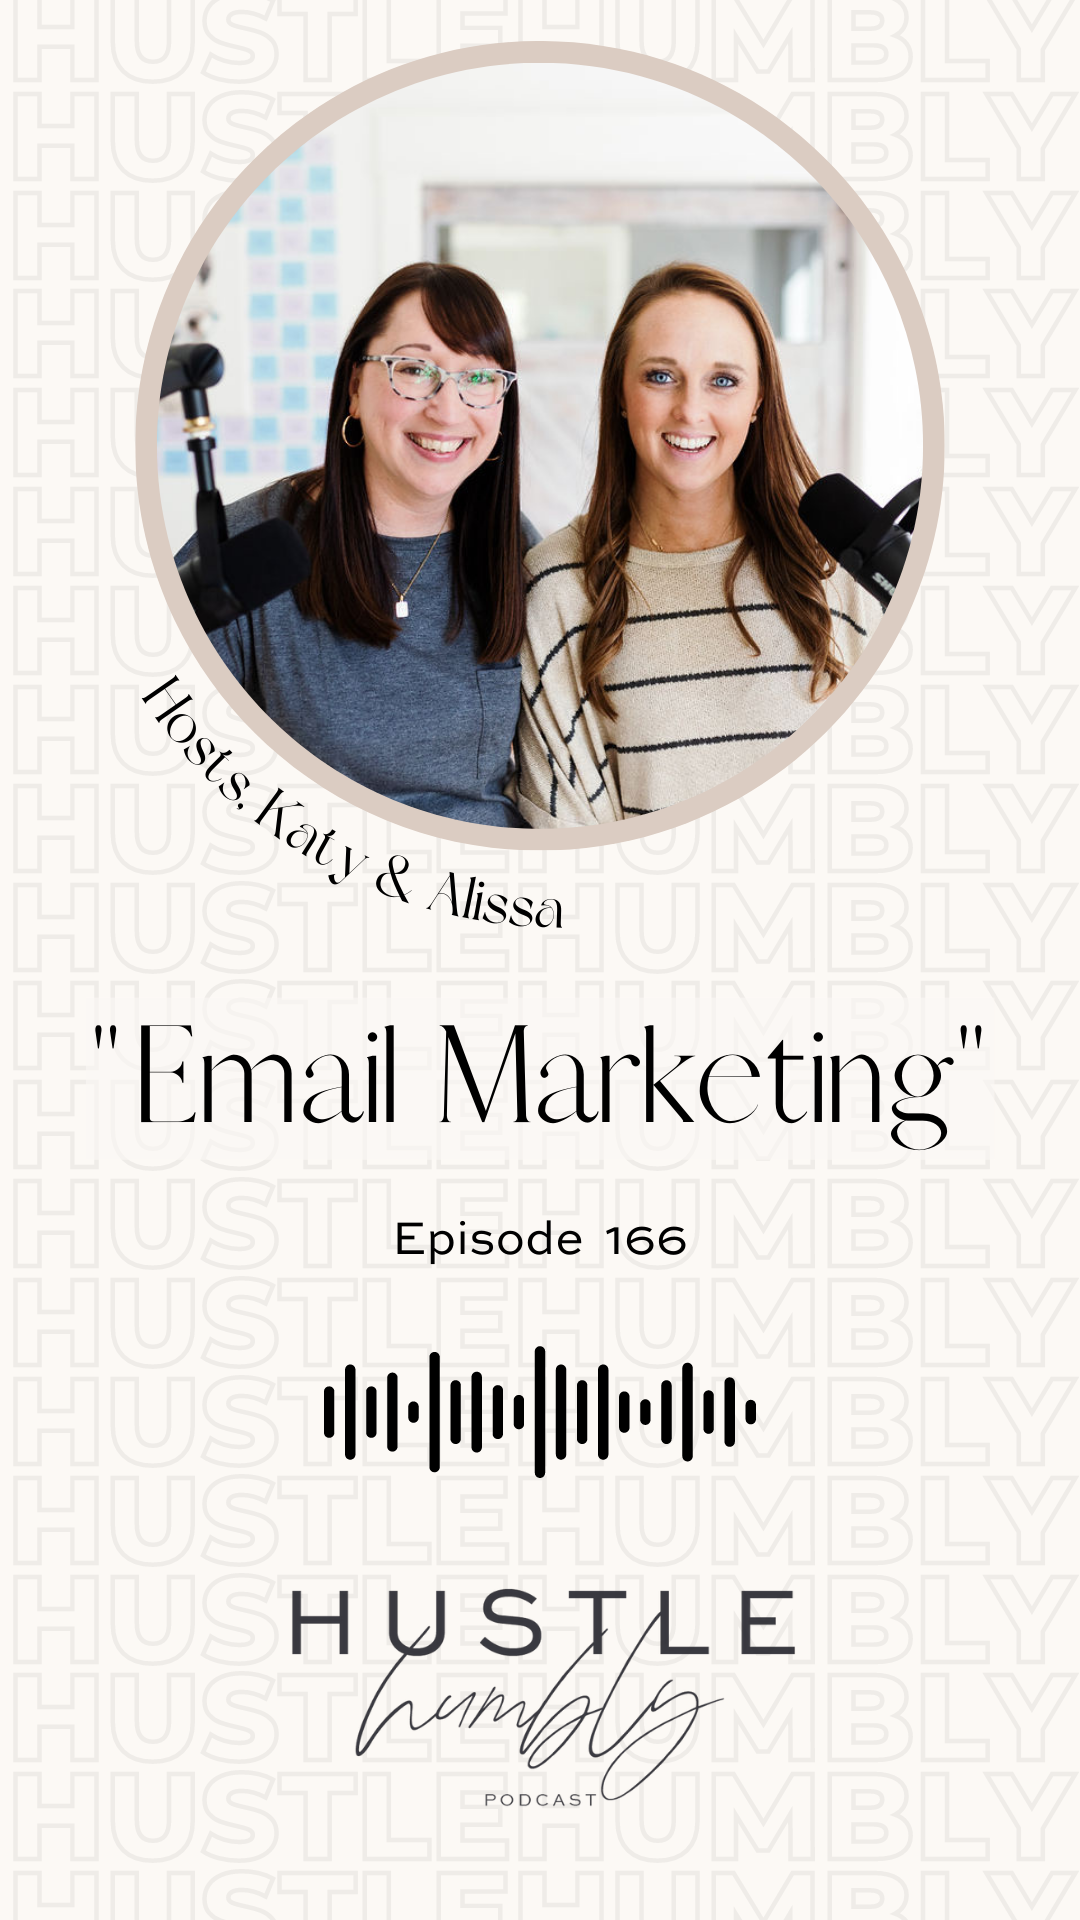 Hustle Humbly Podcast Episode 166: Email Marketing/Real Estate Newsletters